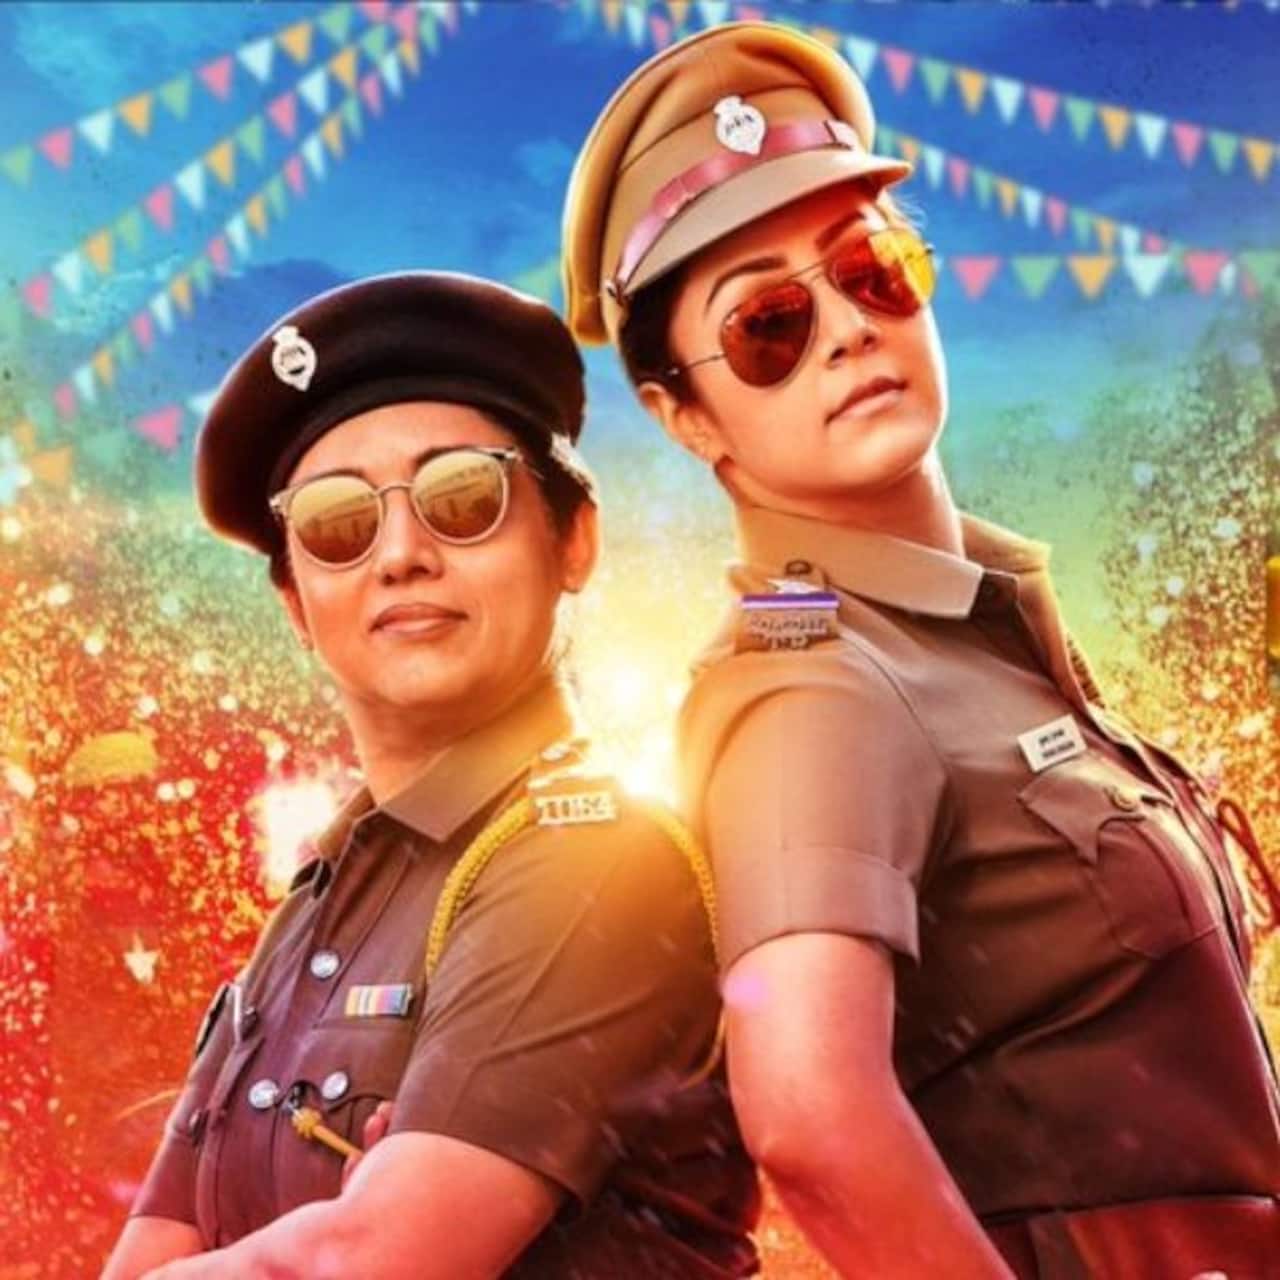 Jackpot: Jyothika and Revathi don Khakhi in the latest poster revealed by Suriya – view pic